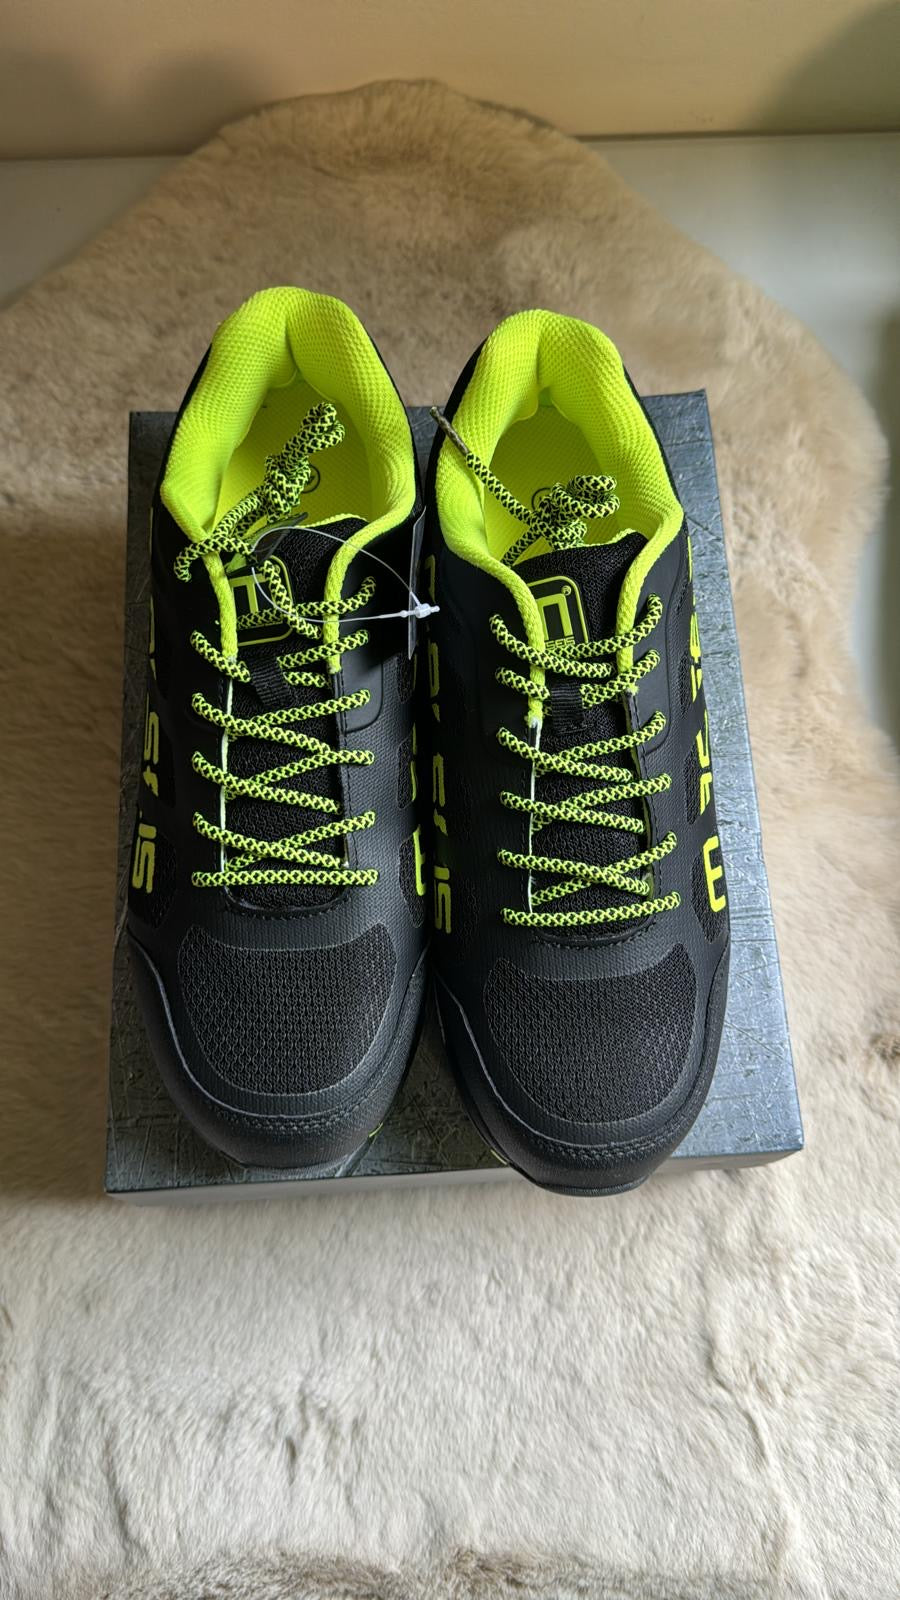 NEW Safety work Shoes Black and Green